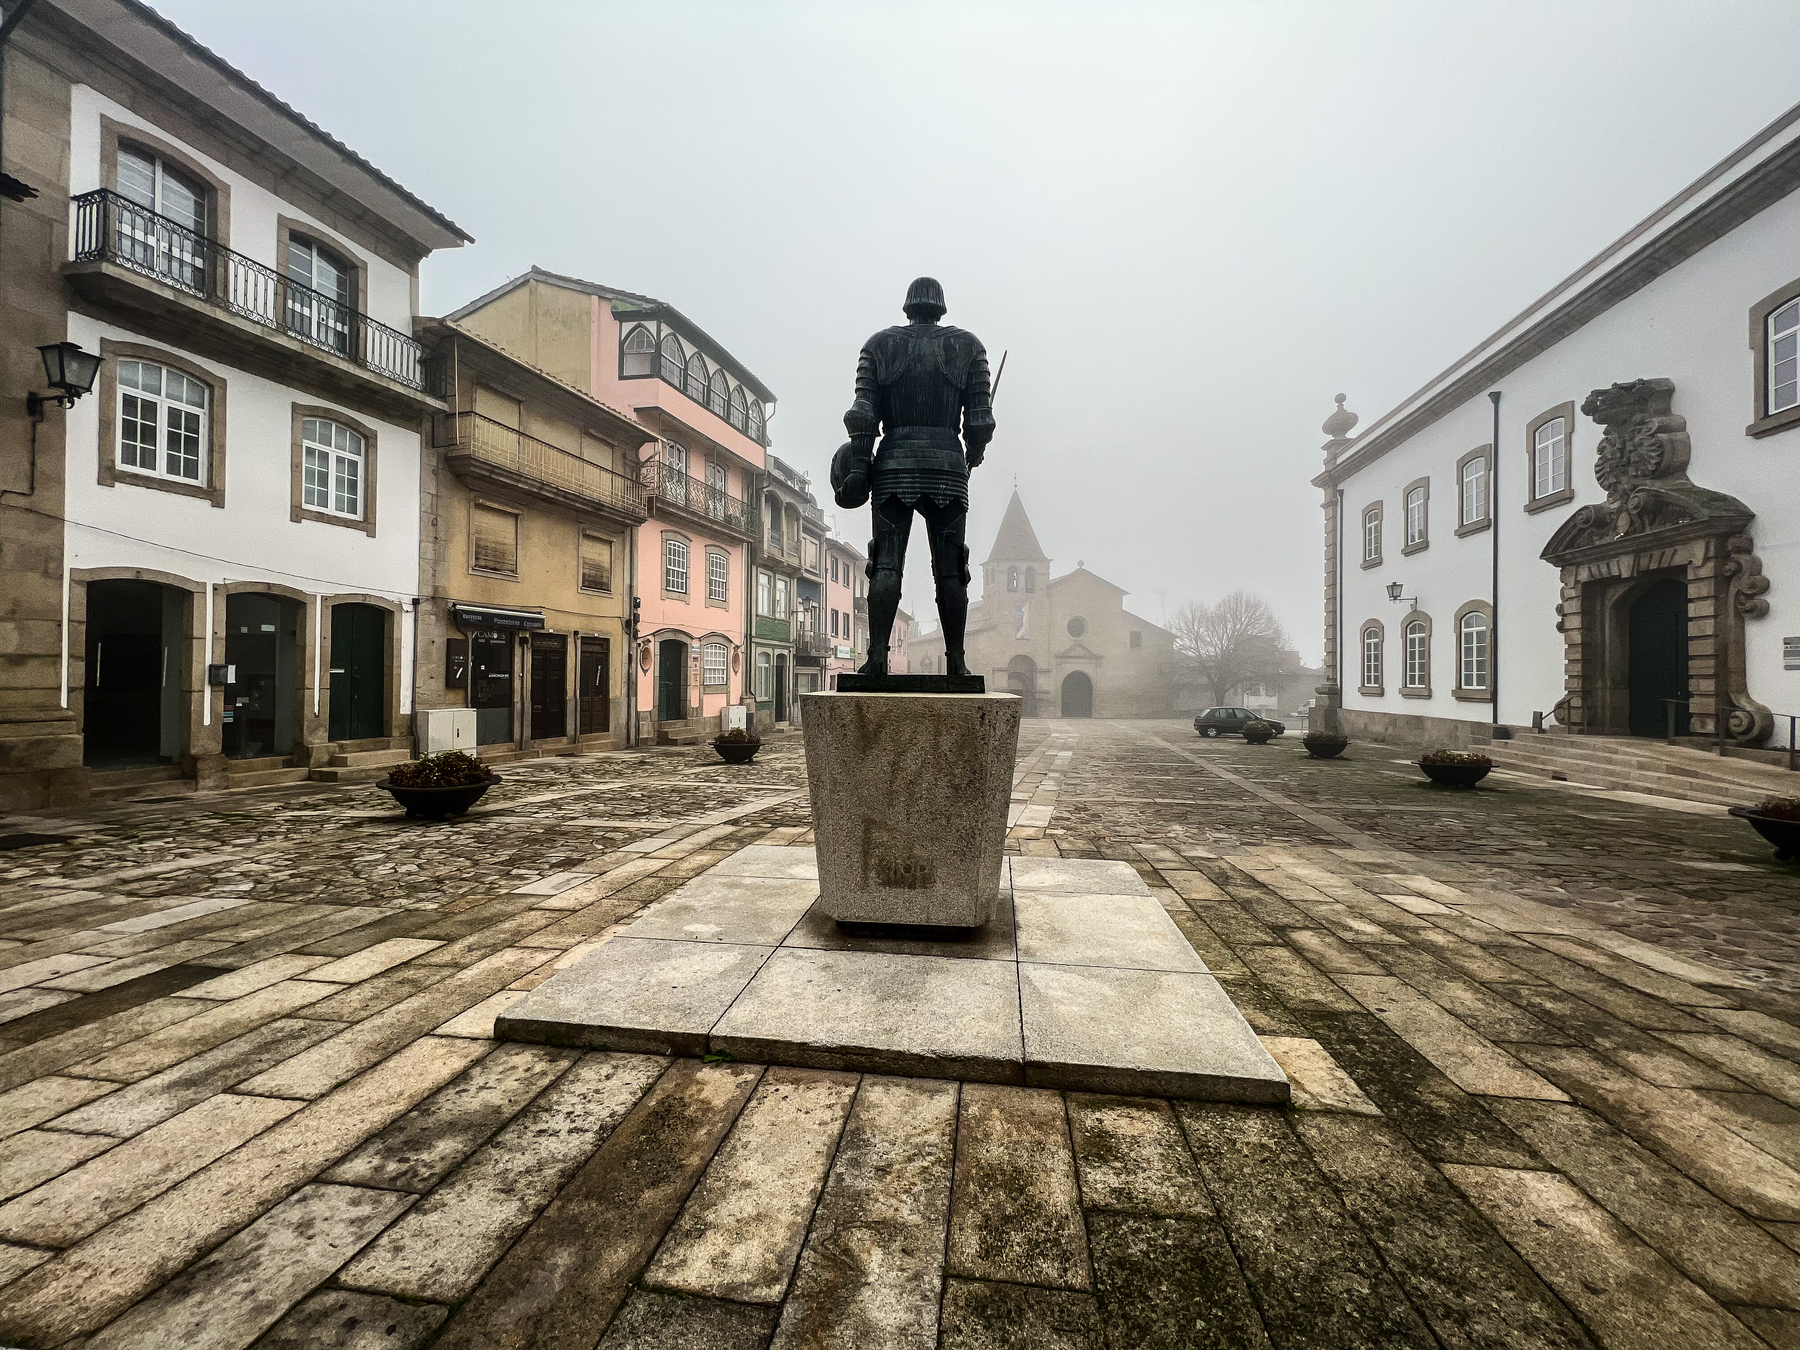 A statue stands in the middle of a square in the old part of town. 